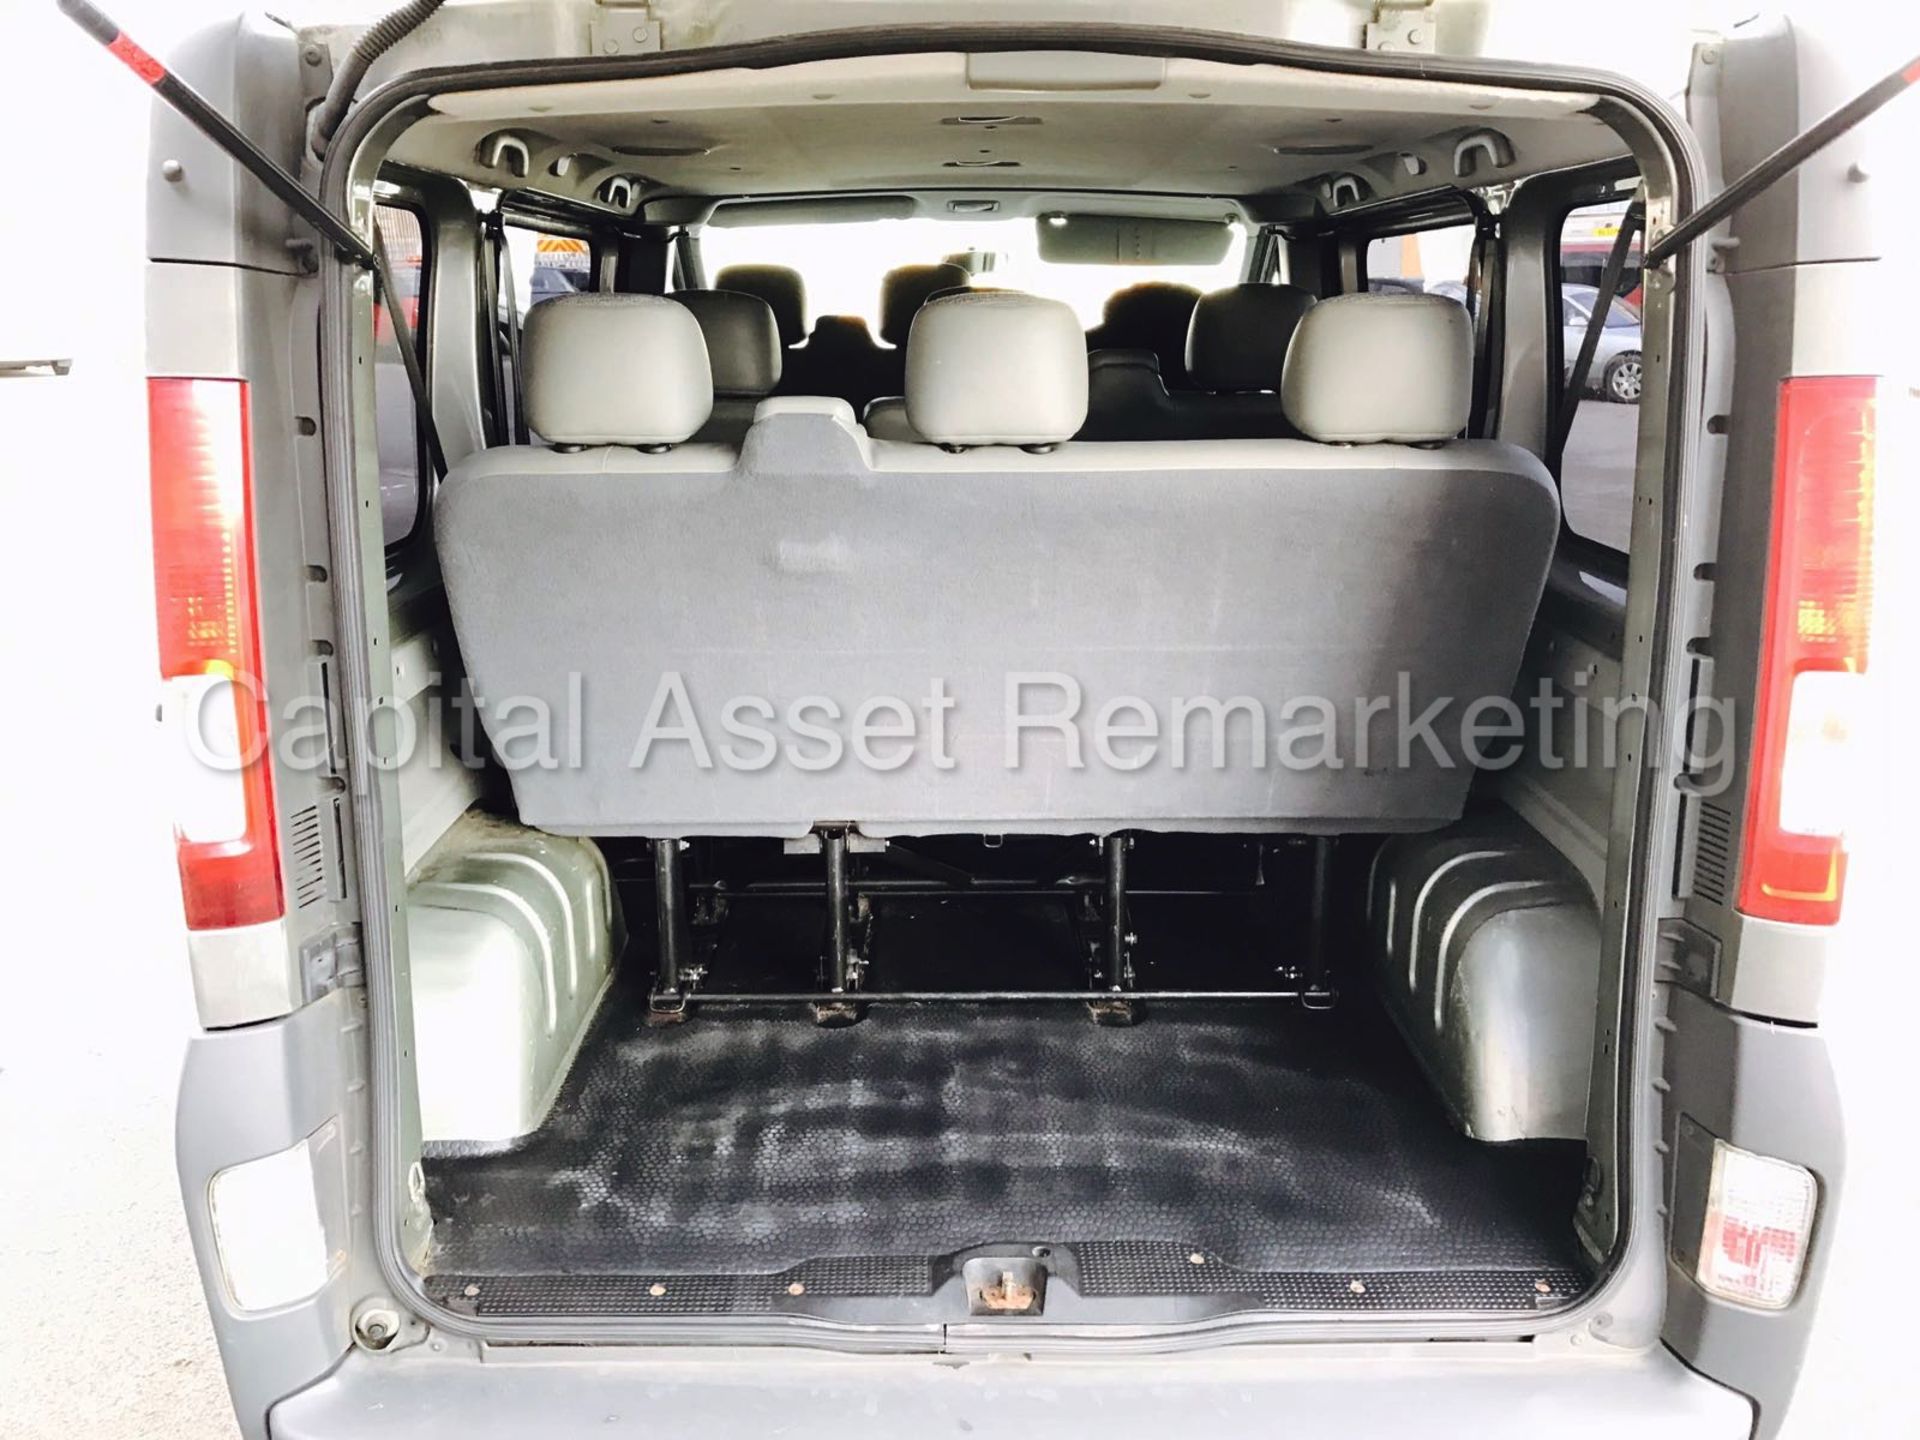 RENAULT TRAFIC SL29 '9 SEATER BUS' (2007) '1.9 DCI - 115 PS - 6 SPEED - A/C' (NO VAT - SAVE 20%) - Image 7 of 15